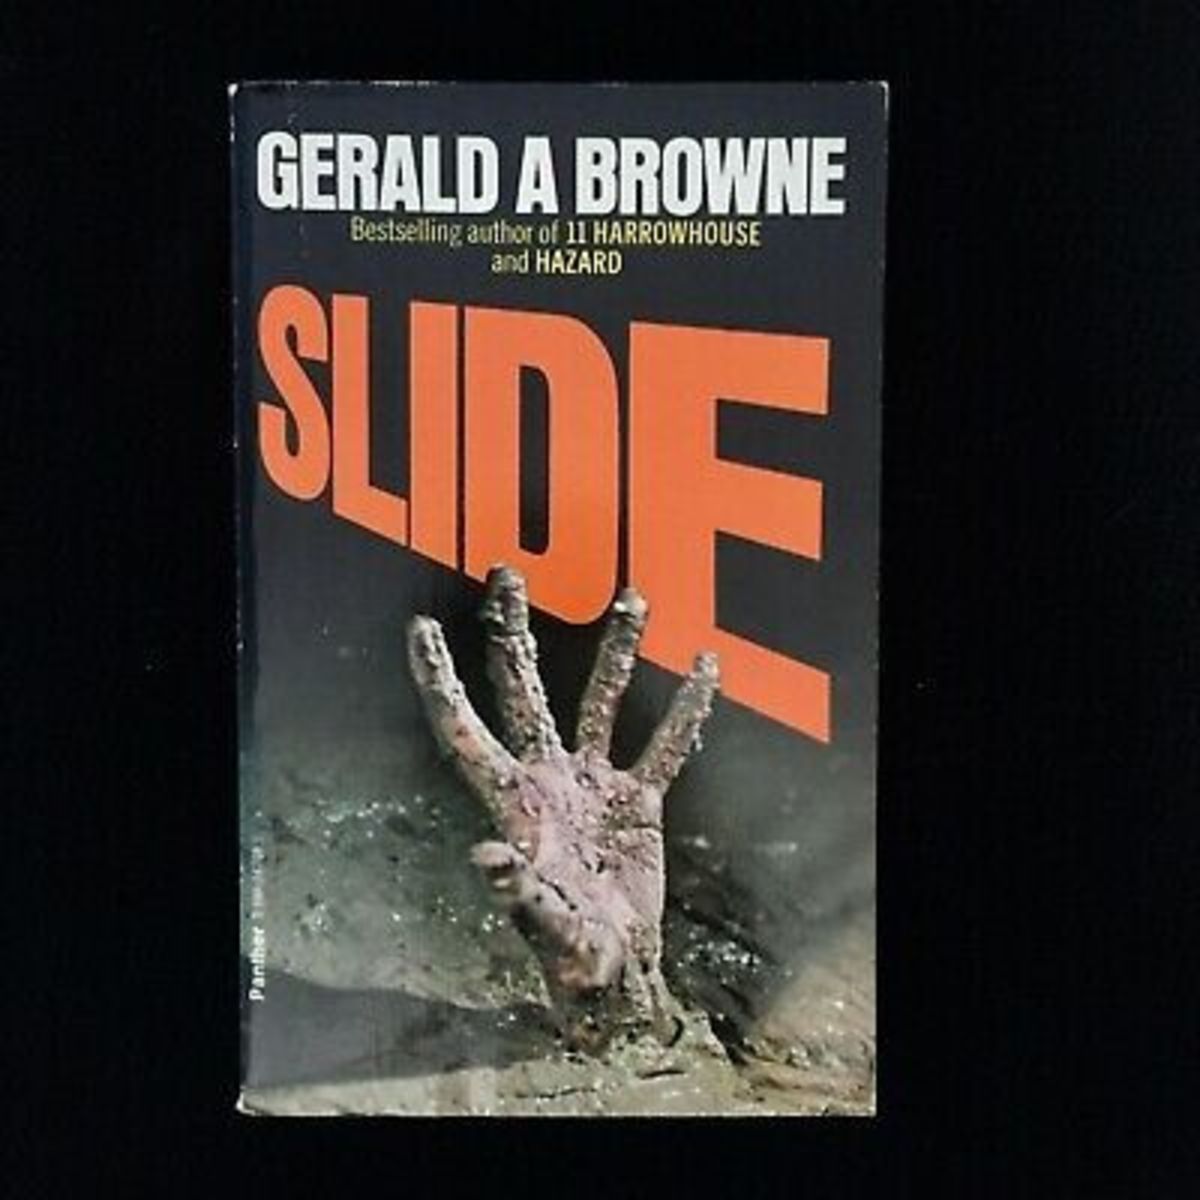 retro-reading-slide-by-gerald-a-browne